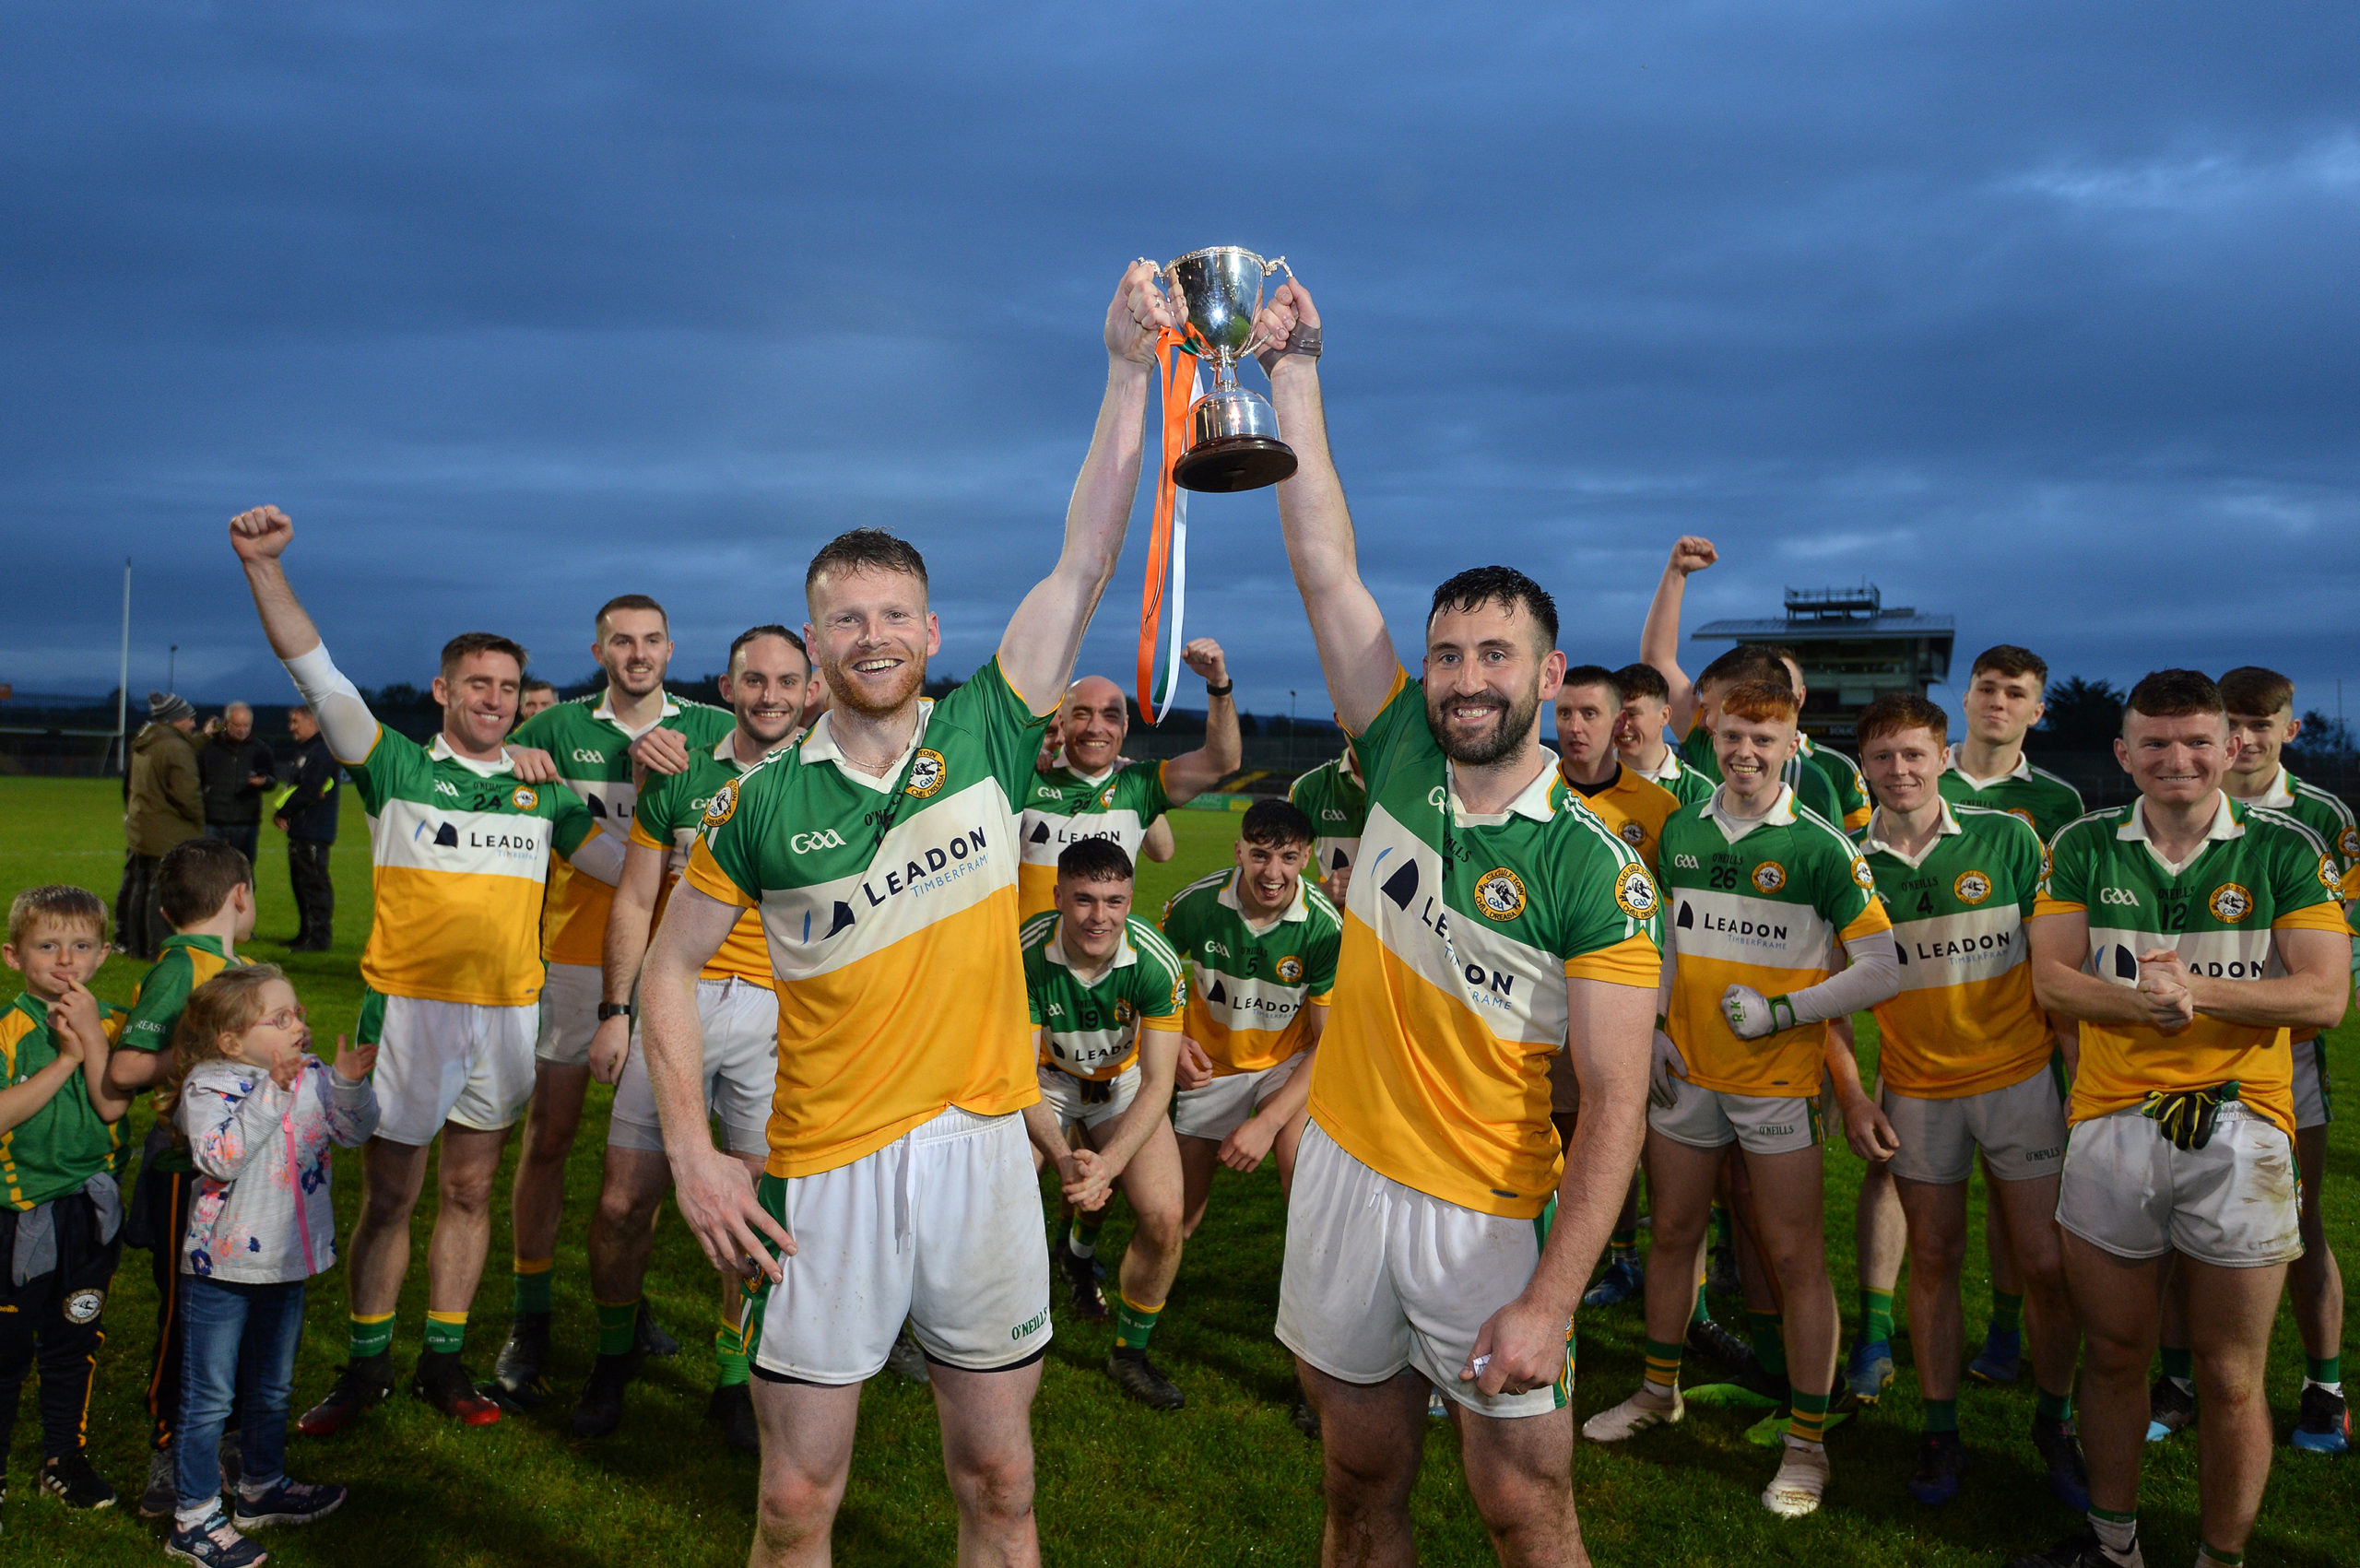 Ask the players: Kildress Wolfe Tones’ Philip Lennon